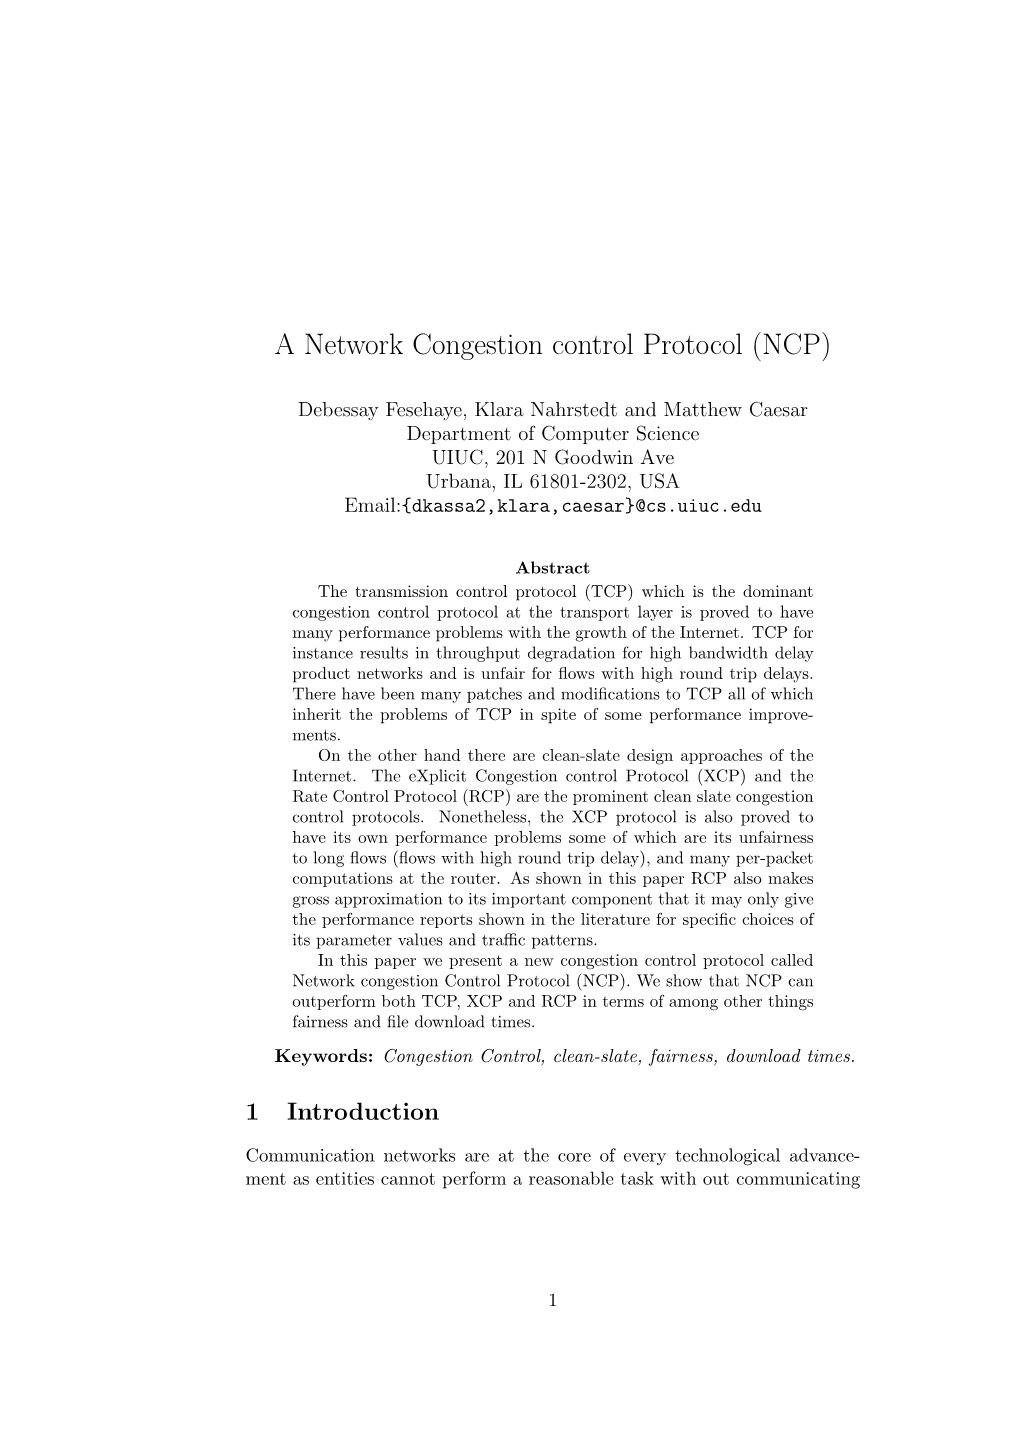 A Network Congestion Control Protocol (NCP)